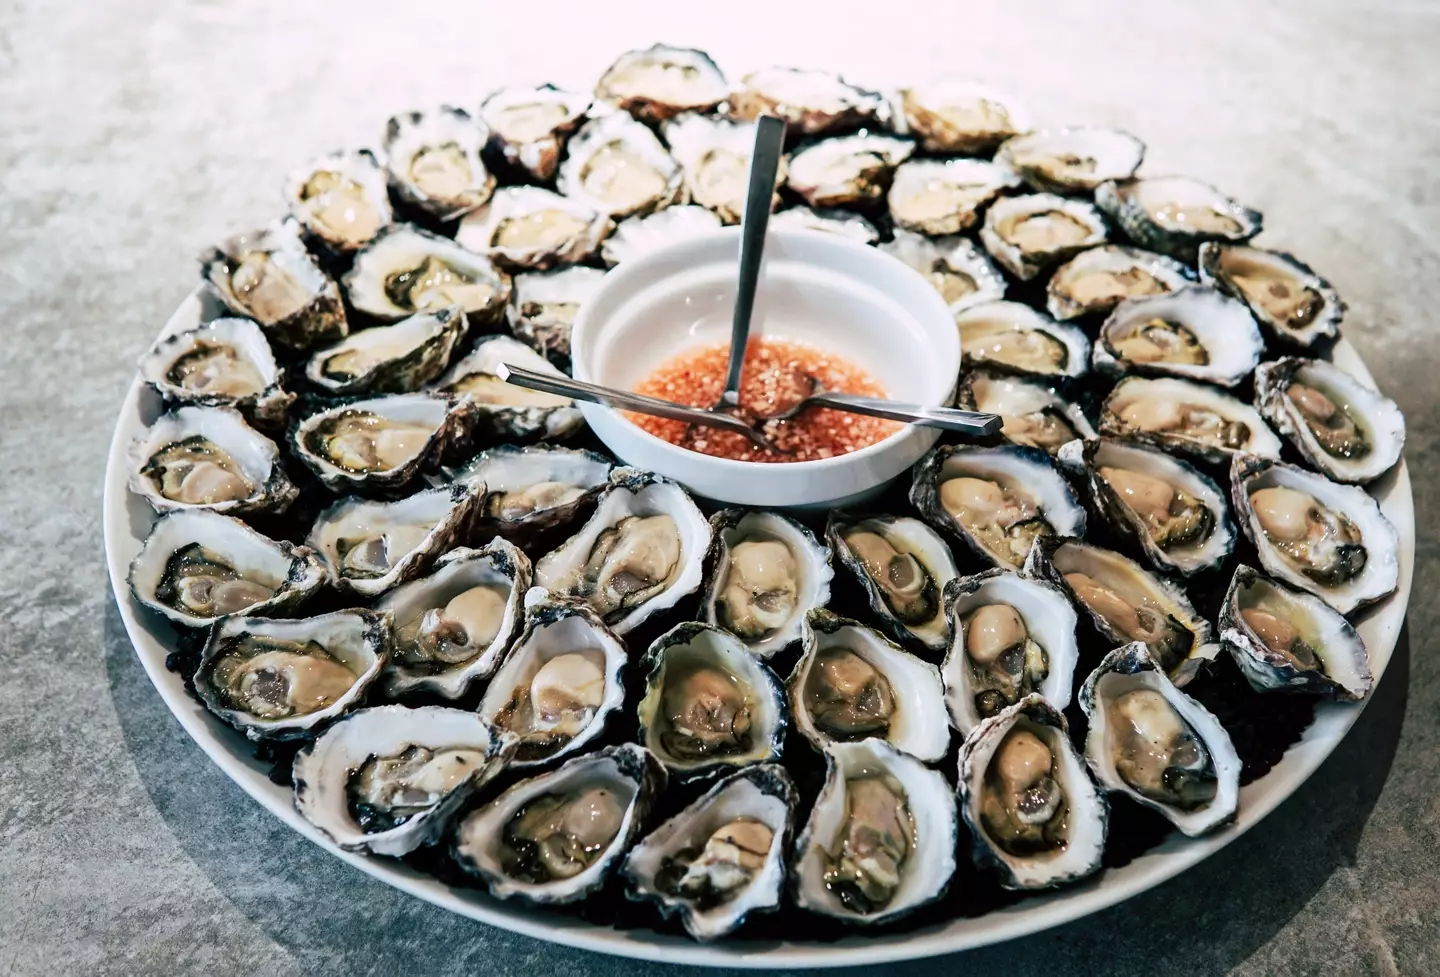 Some vegans argue that they can eat oysters.